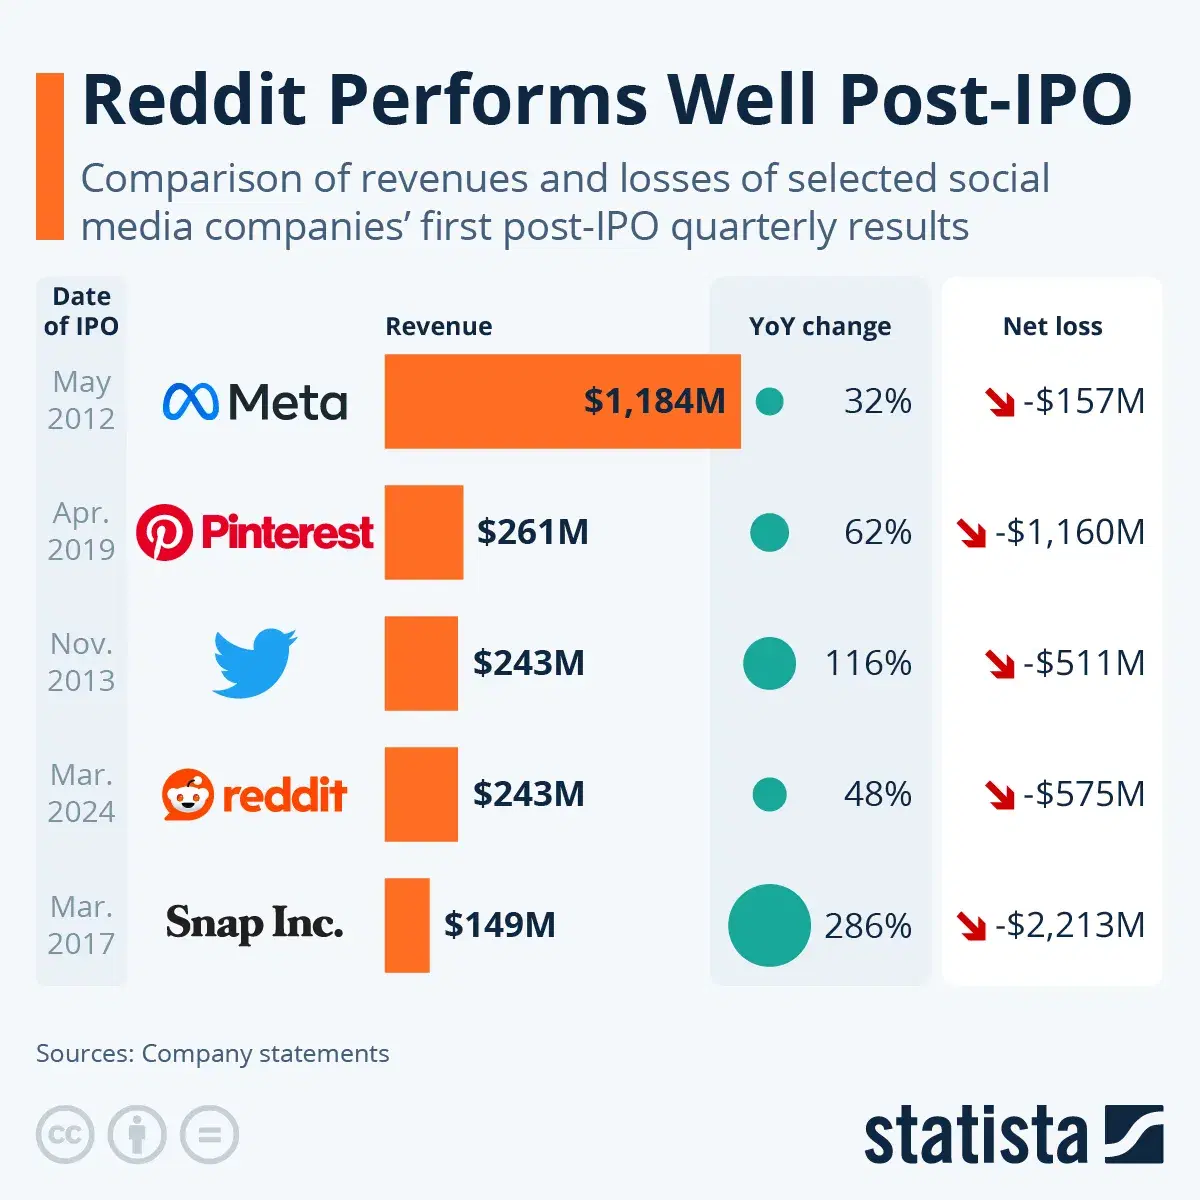 Reddit Increases User Base and Revenue Year Over Year in First Quarter After IPO